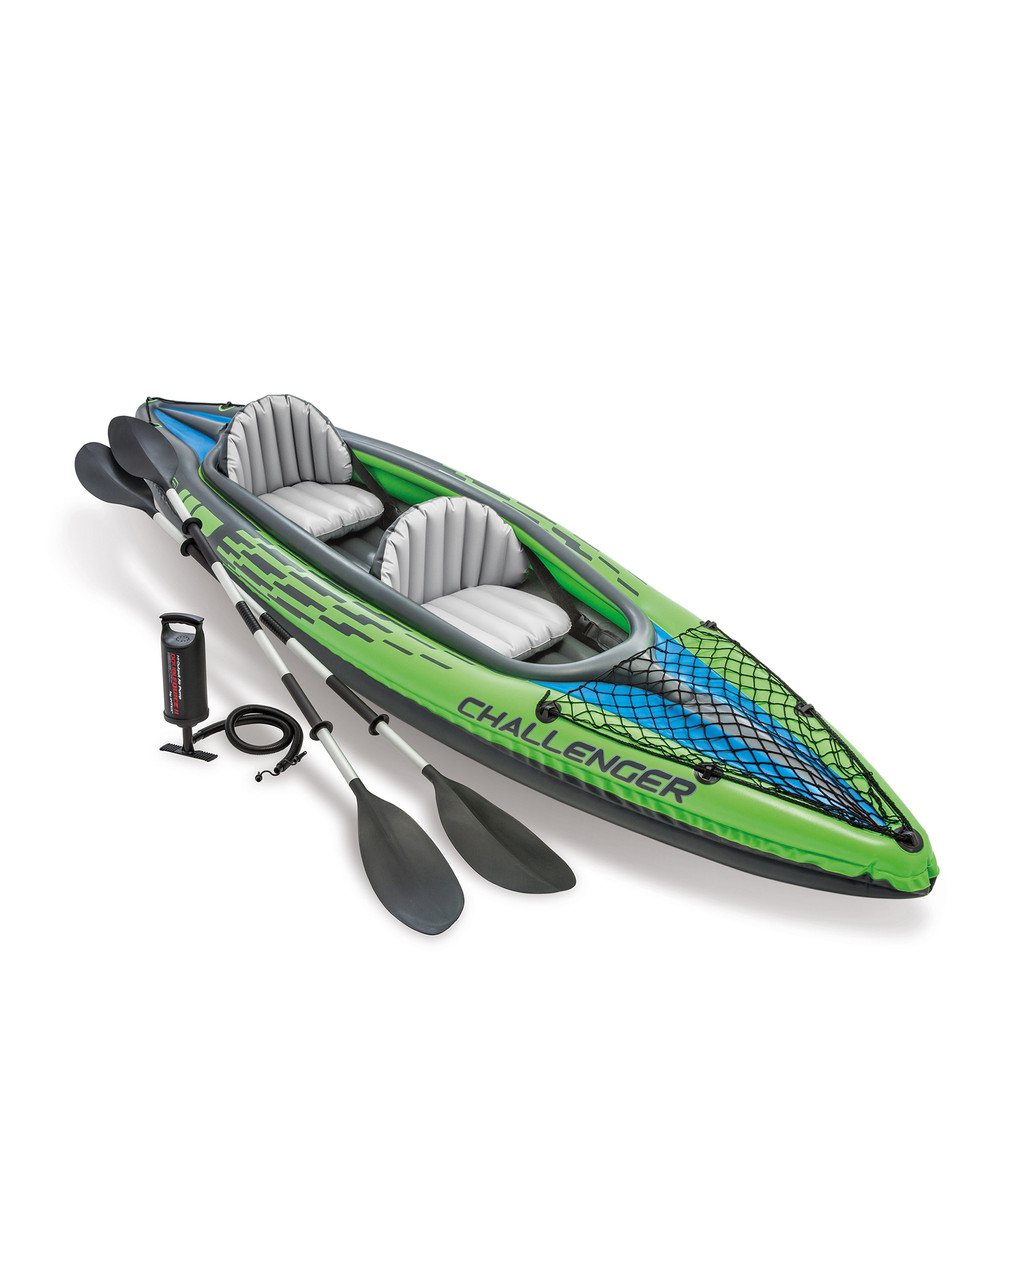 INTEX Challenger™ 2 Inflatable Boat Set - 2 Person